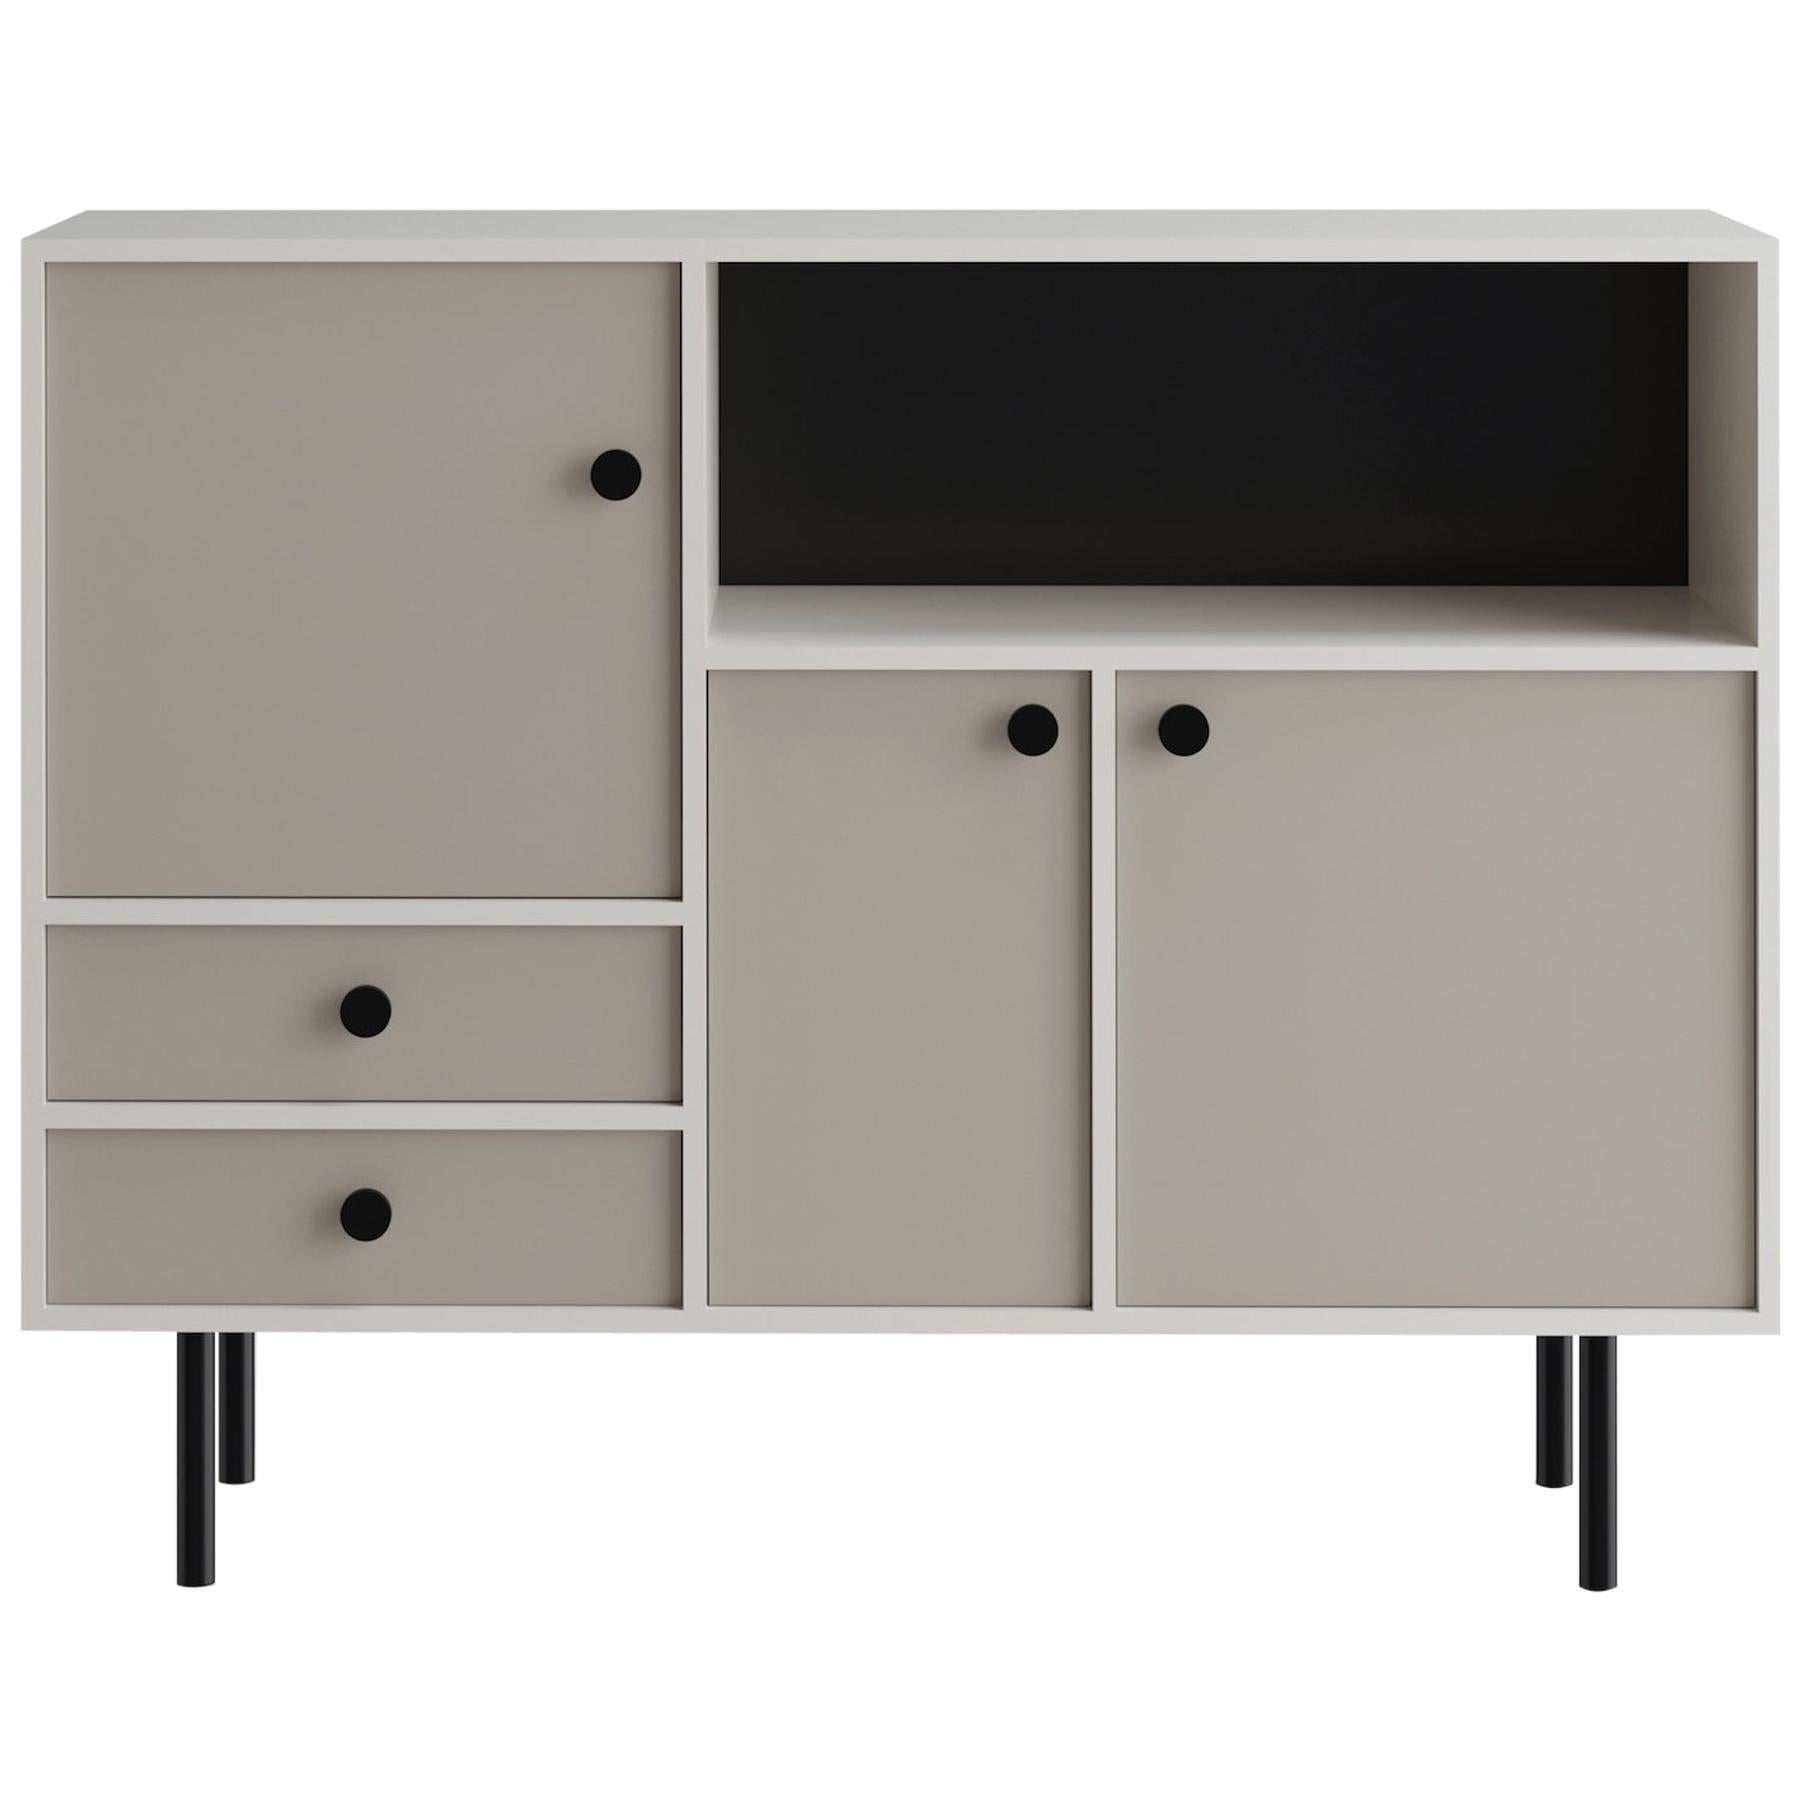 'Avant Garde' Storage Cabinet 'Low,' Bauhaus Style, Color of Your Choice